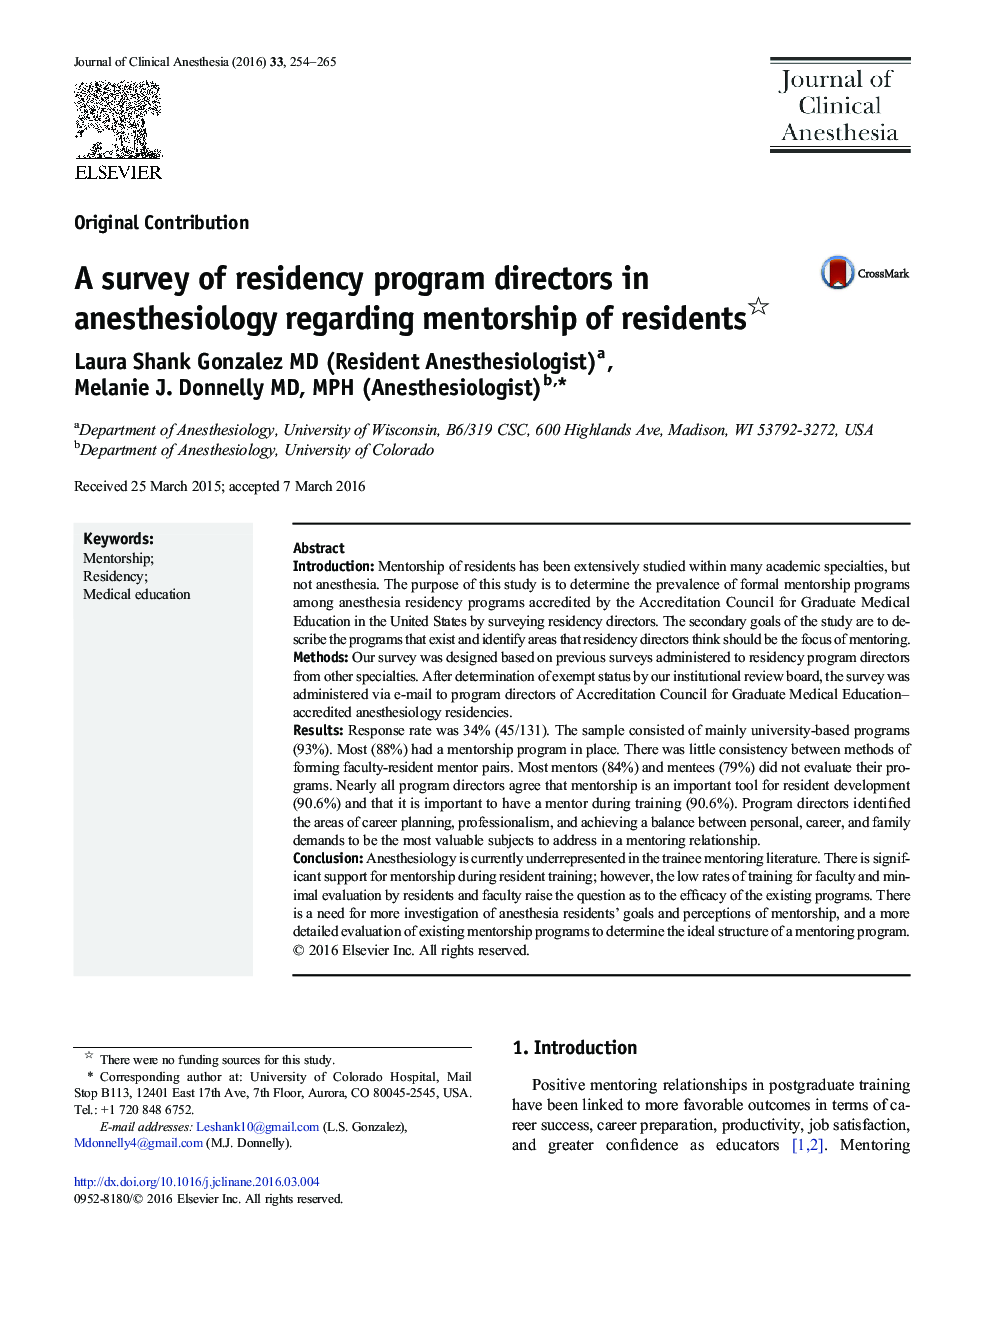 A survey of residency program directors in anesthesiology regarding mentorship of residents 